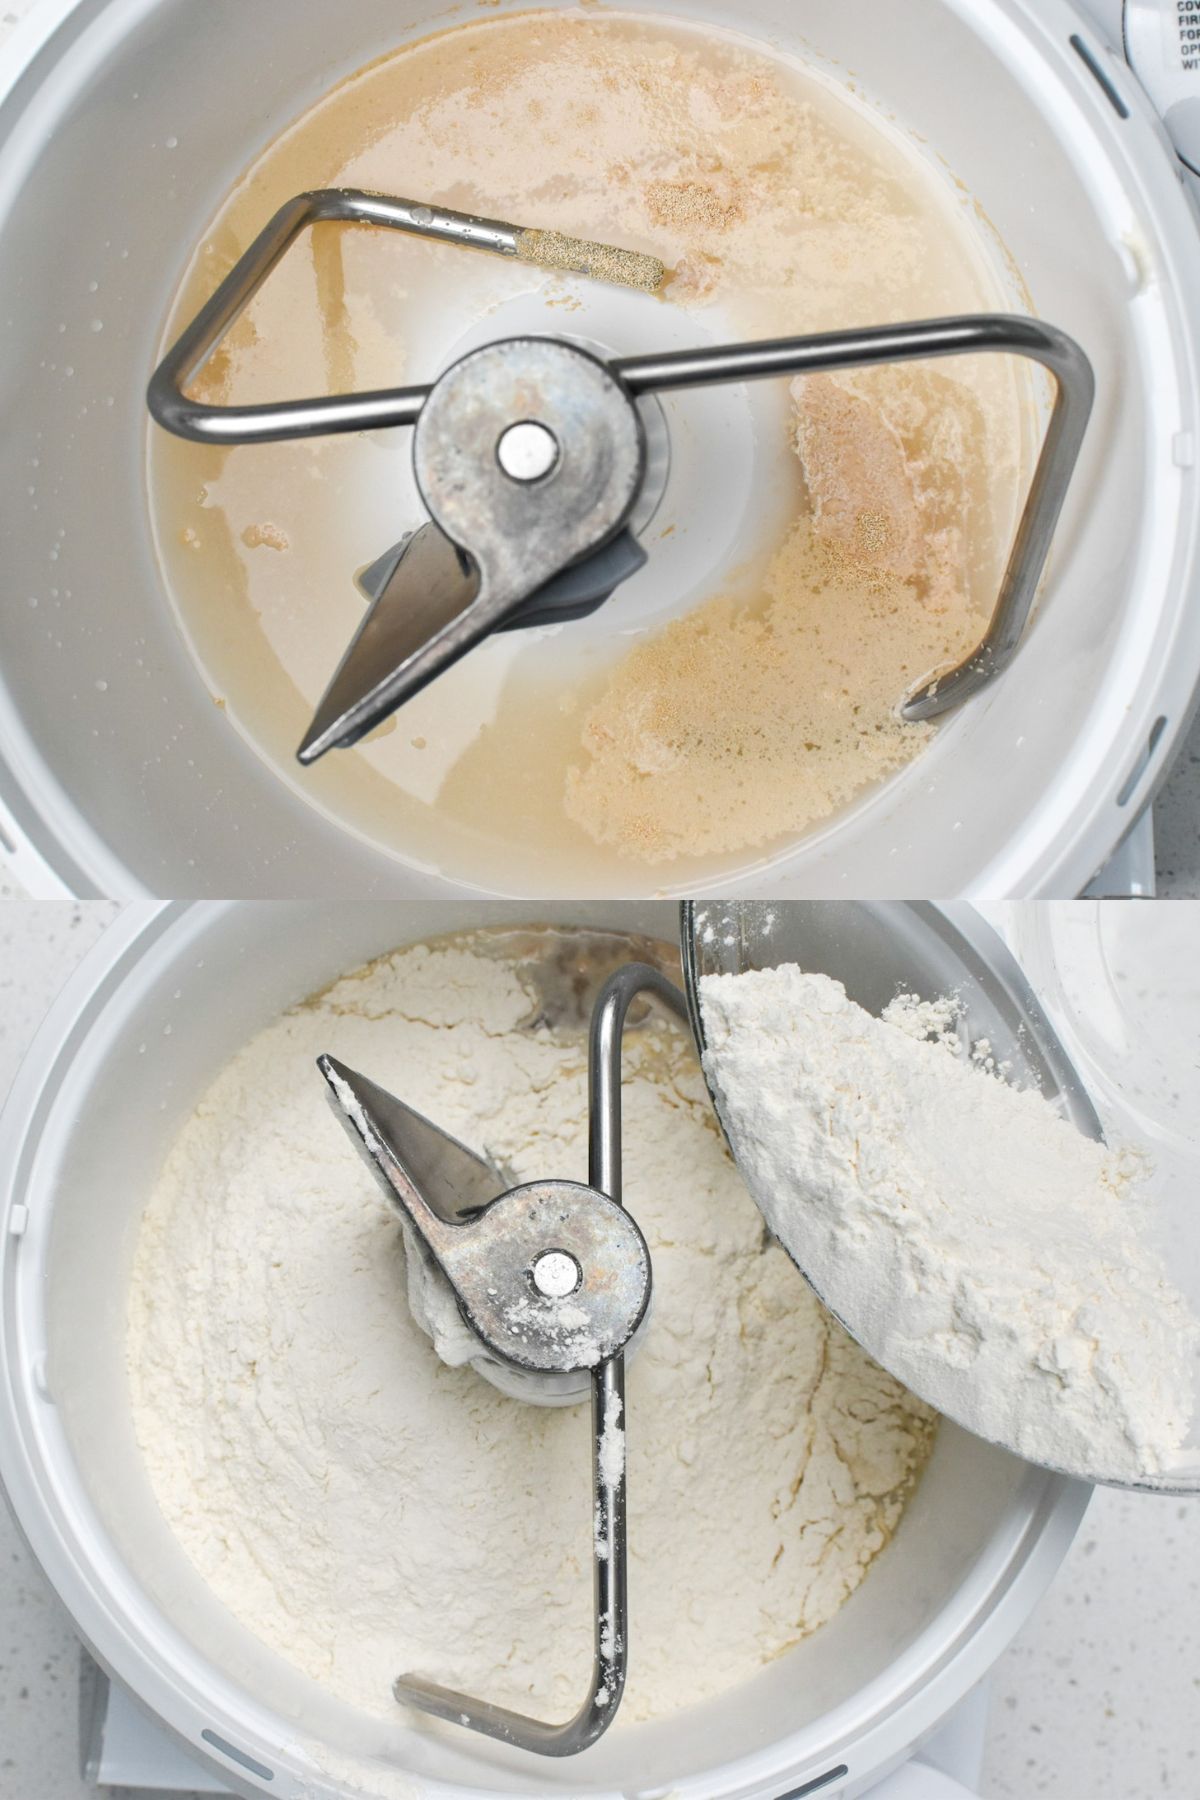 A mixer with the bagel ingredients being added to it.